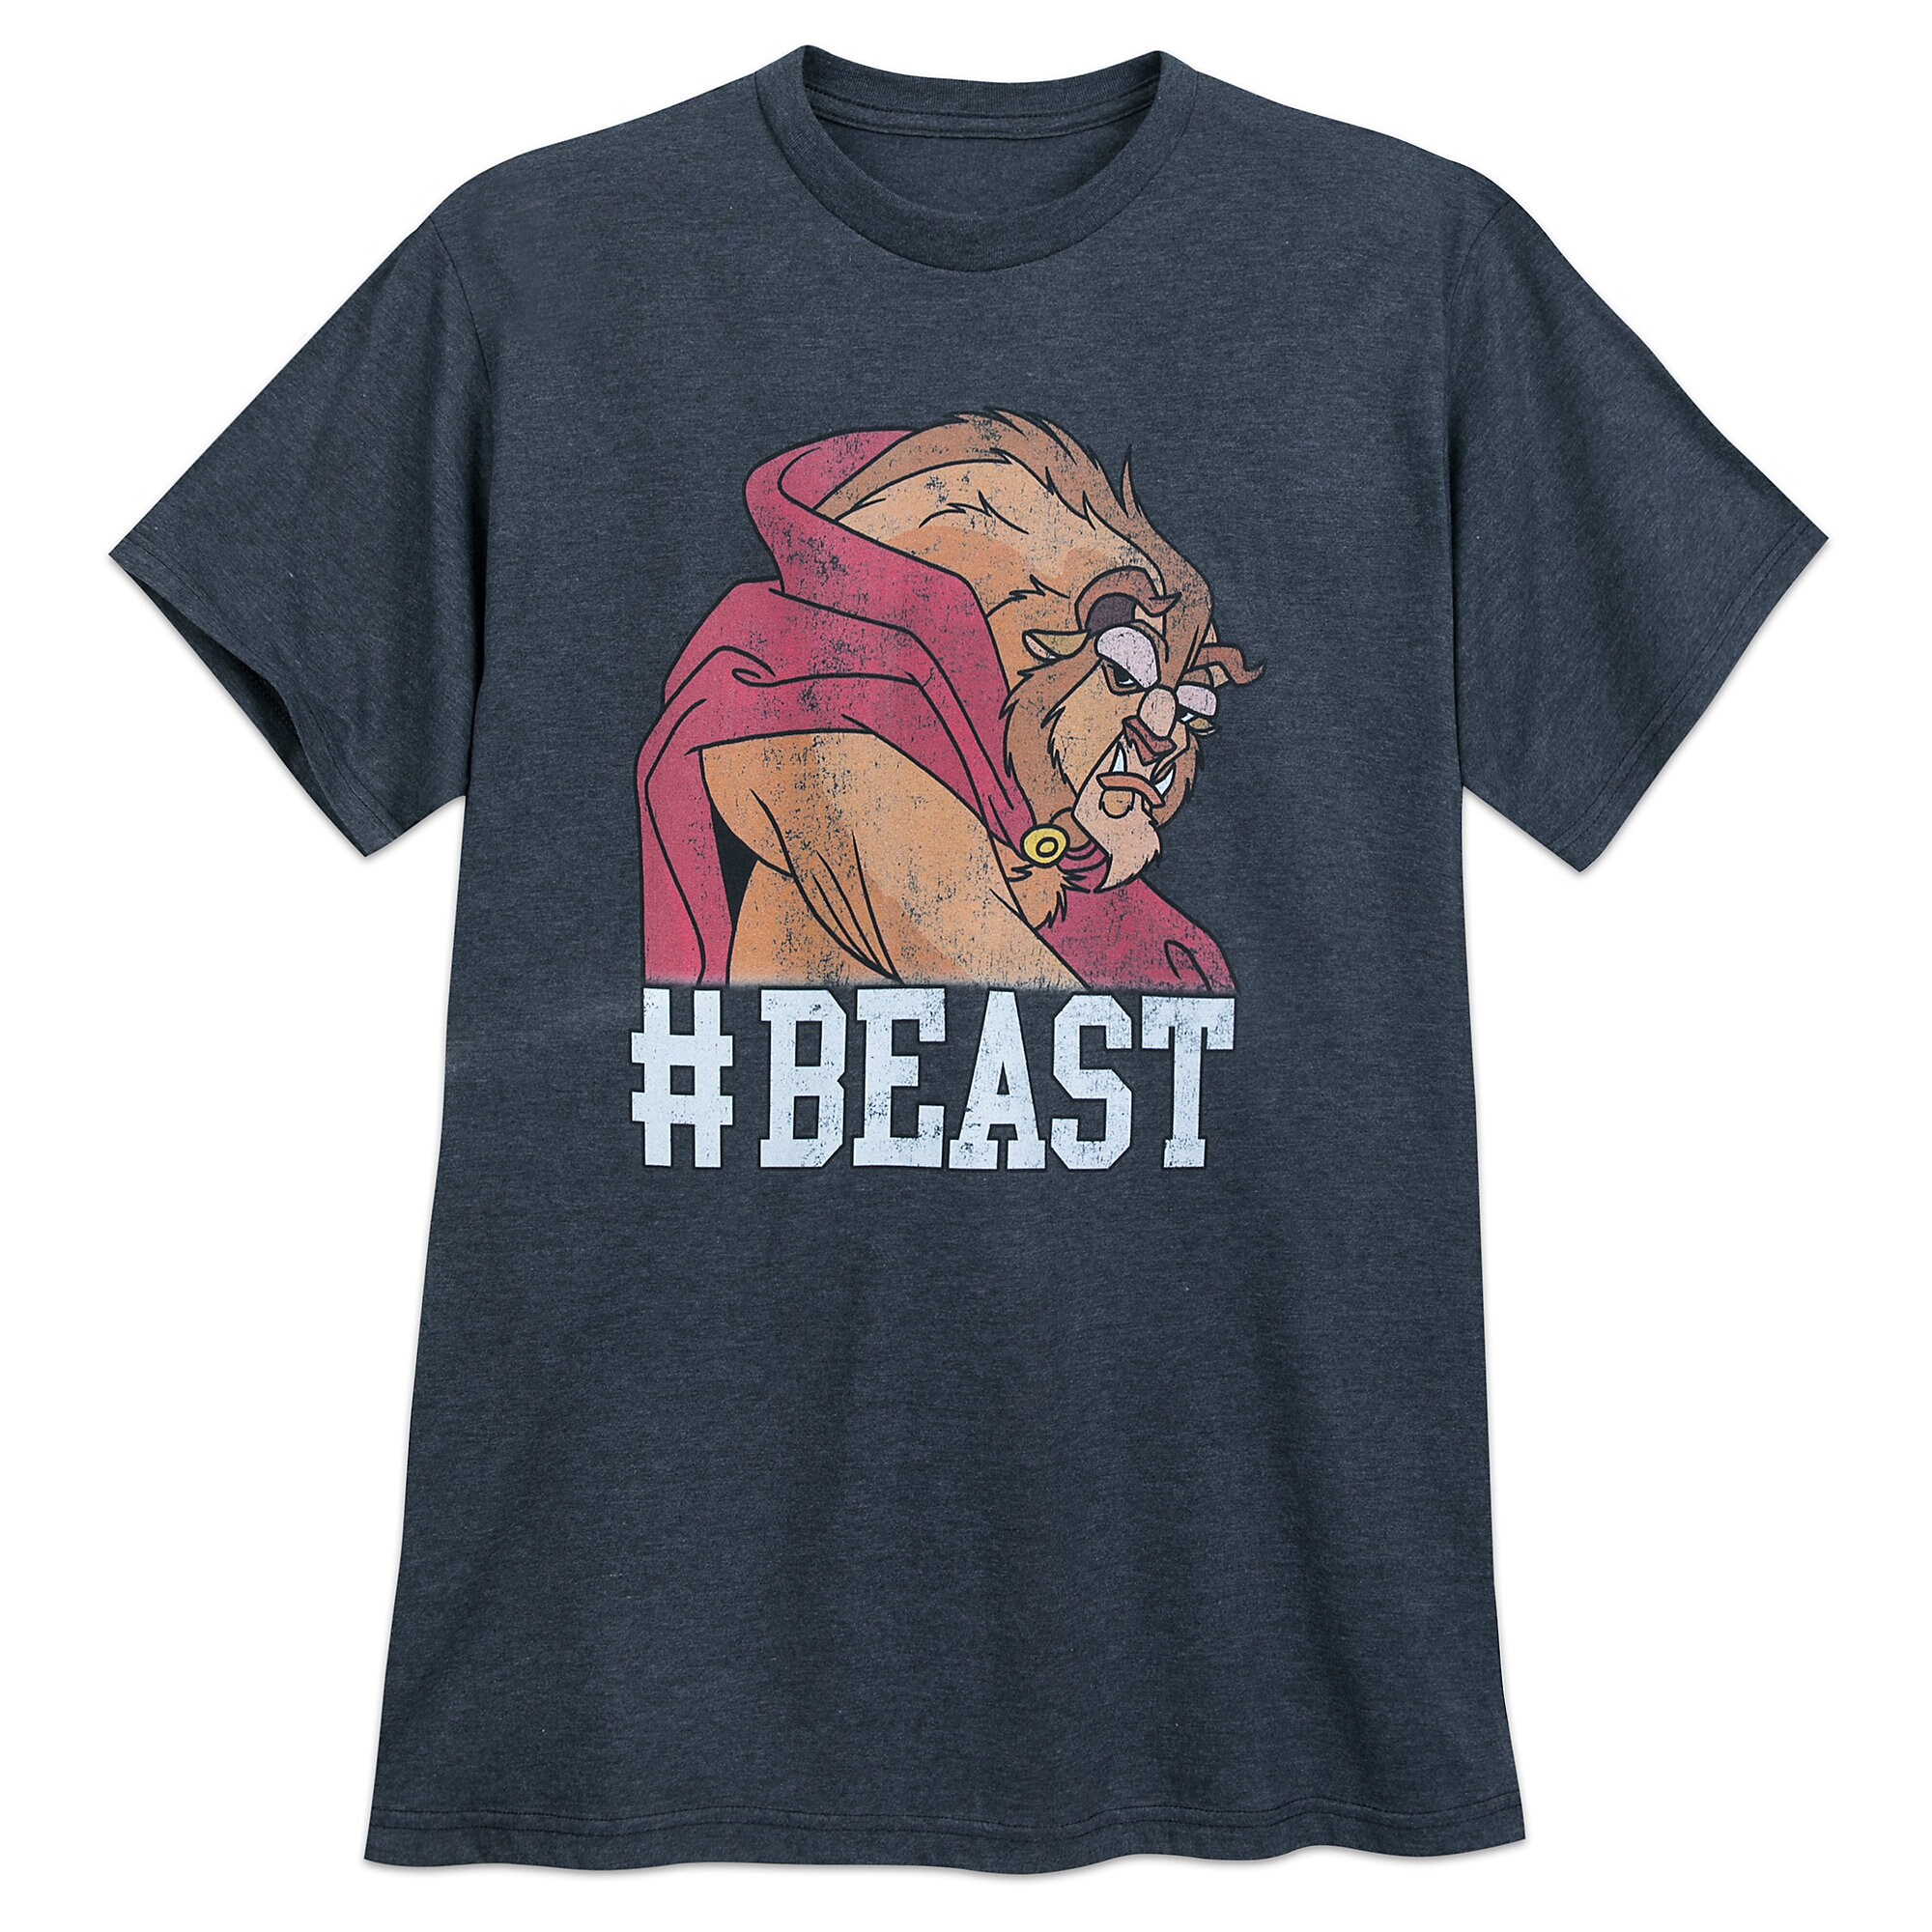 Beast T-Shirt for Men - Beauty and the Beast